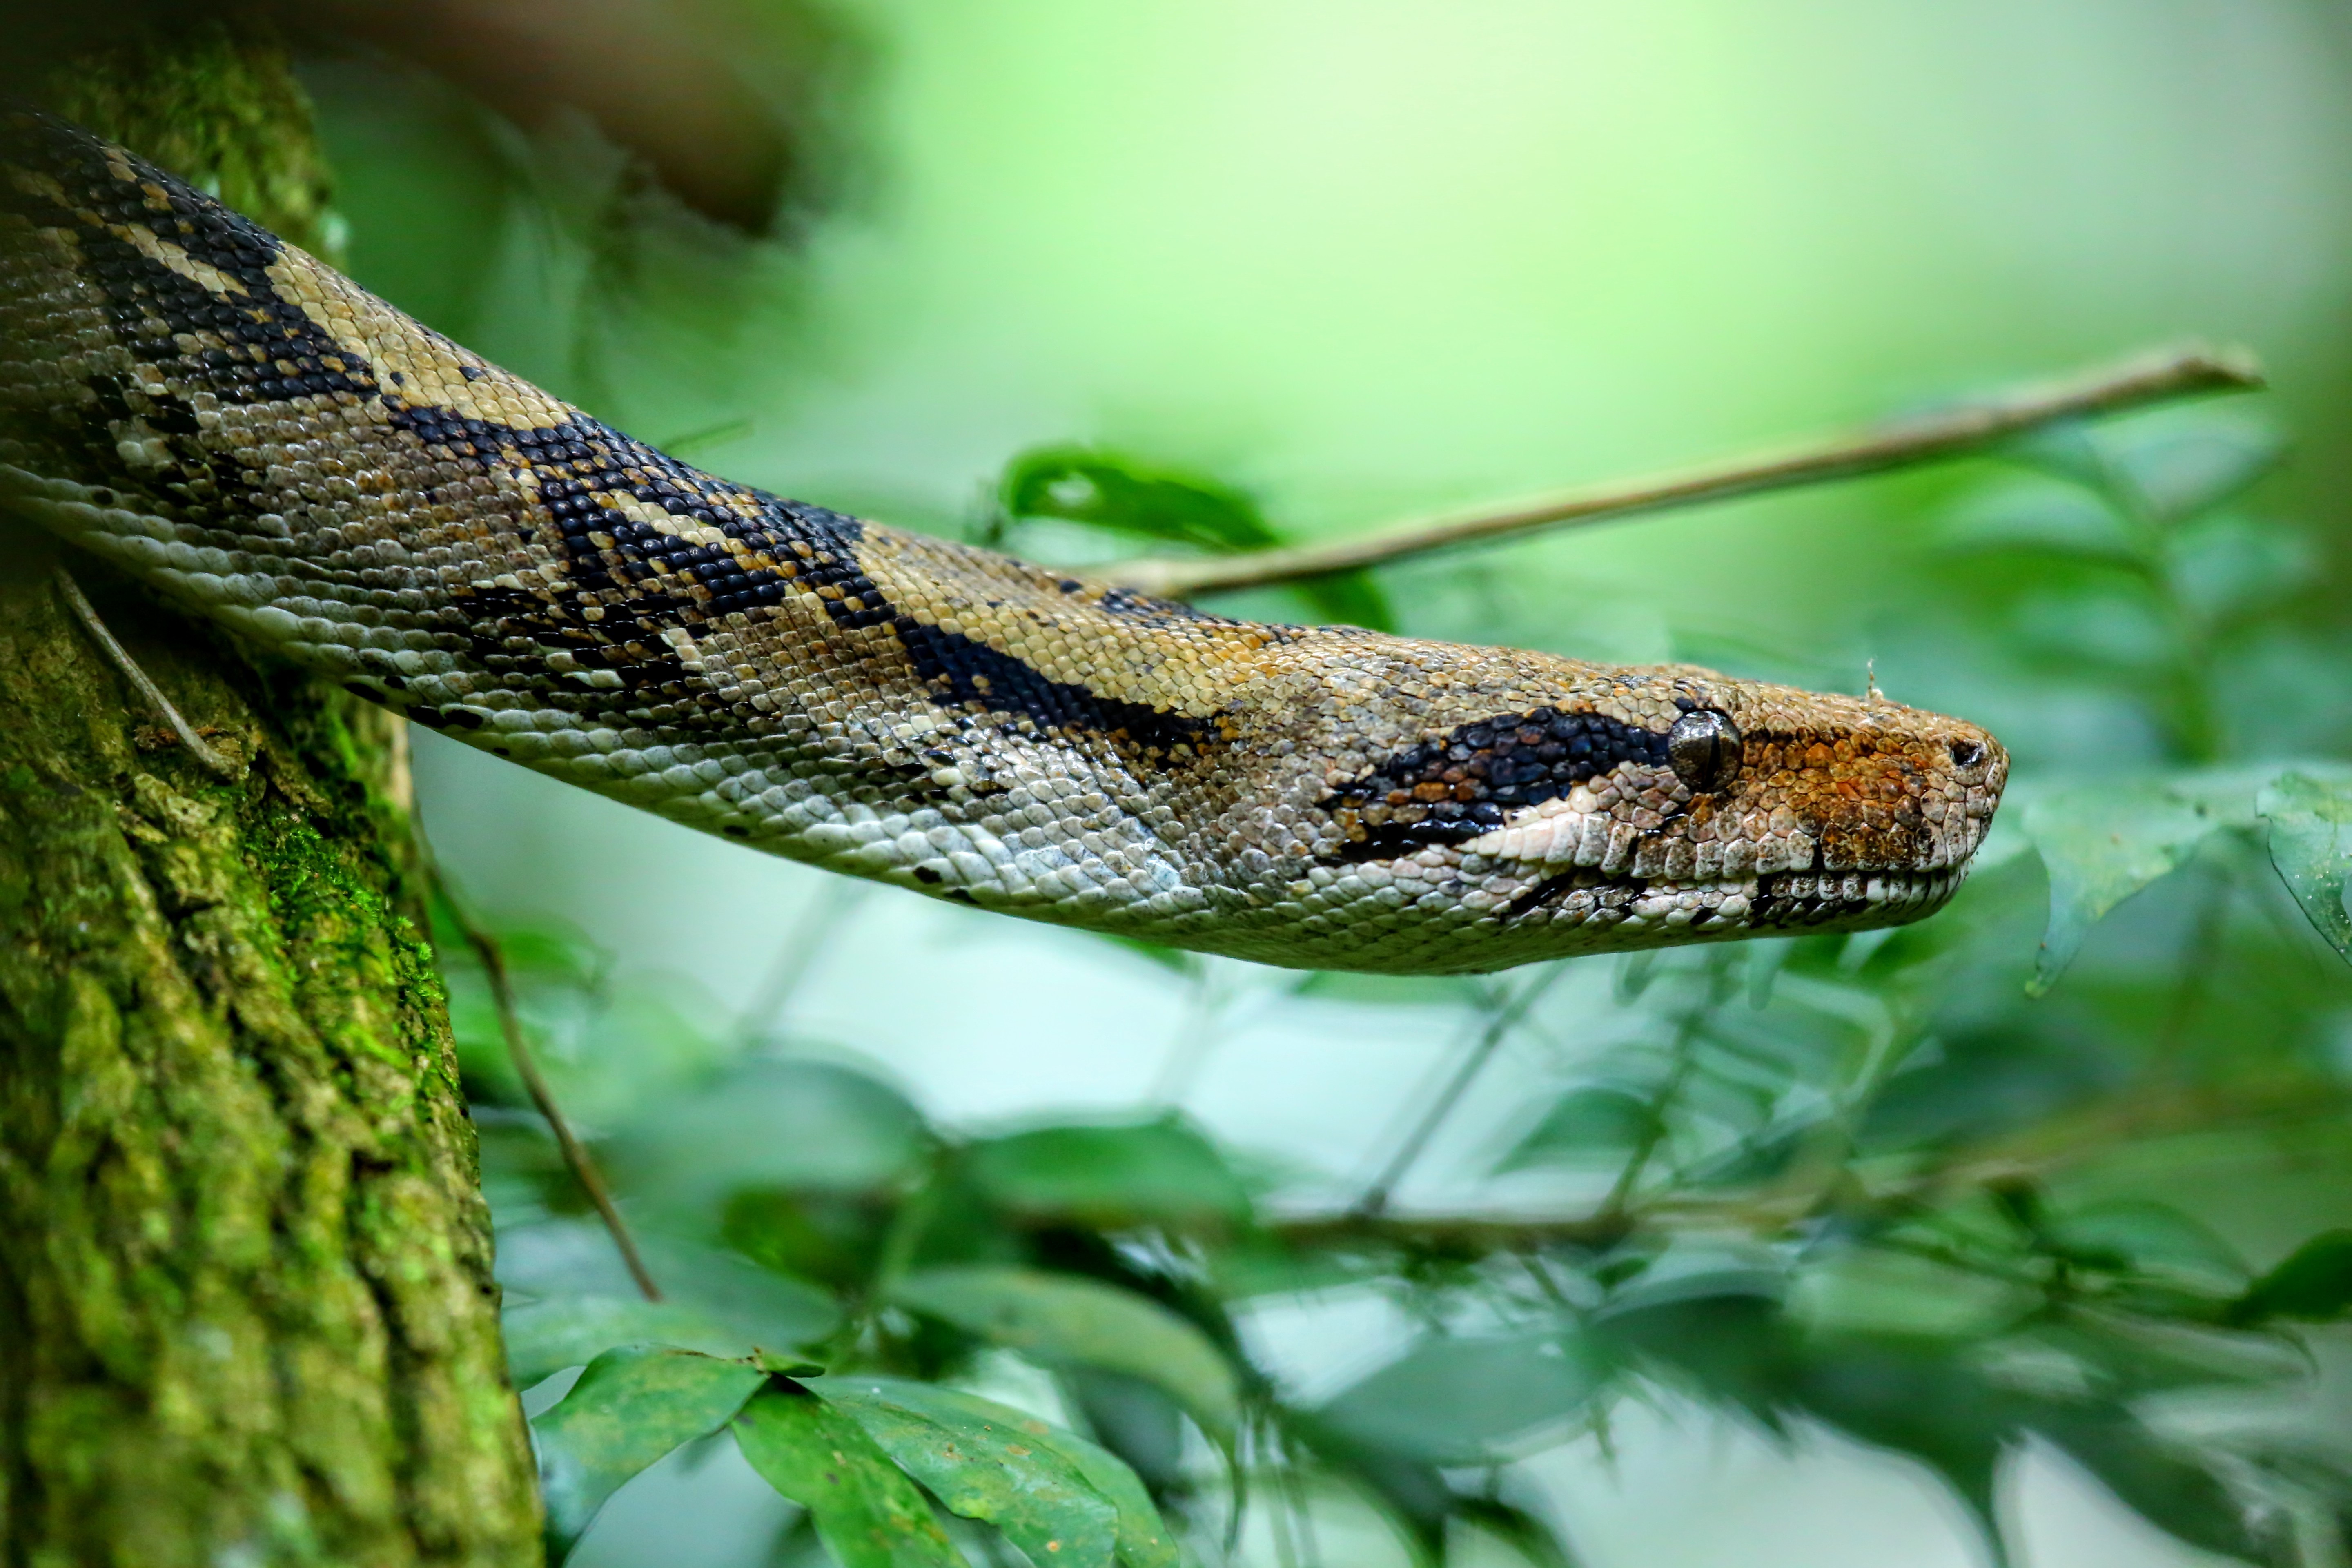 6 interesting facts about boa constrictors | MNN - Mother Nature Network